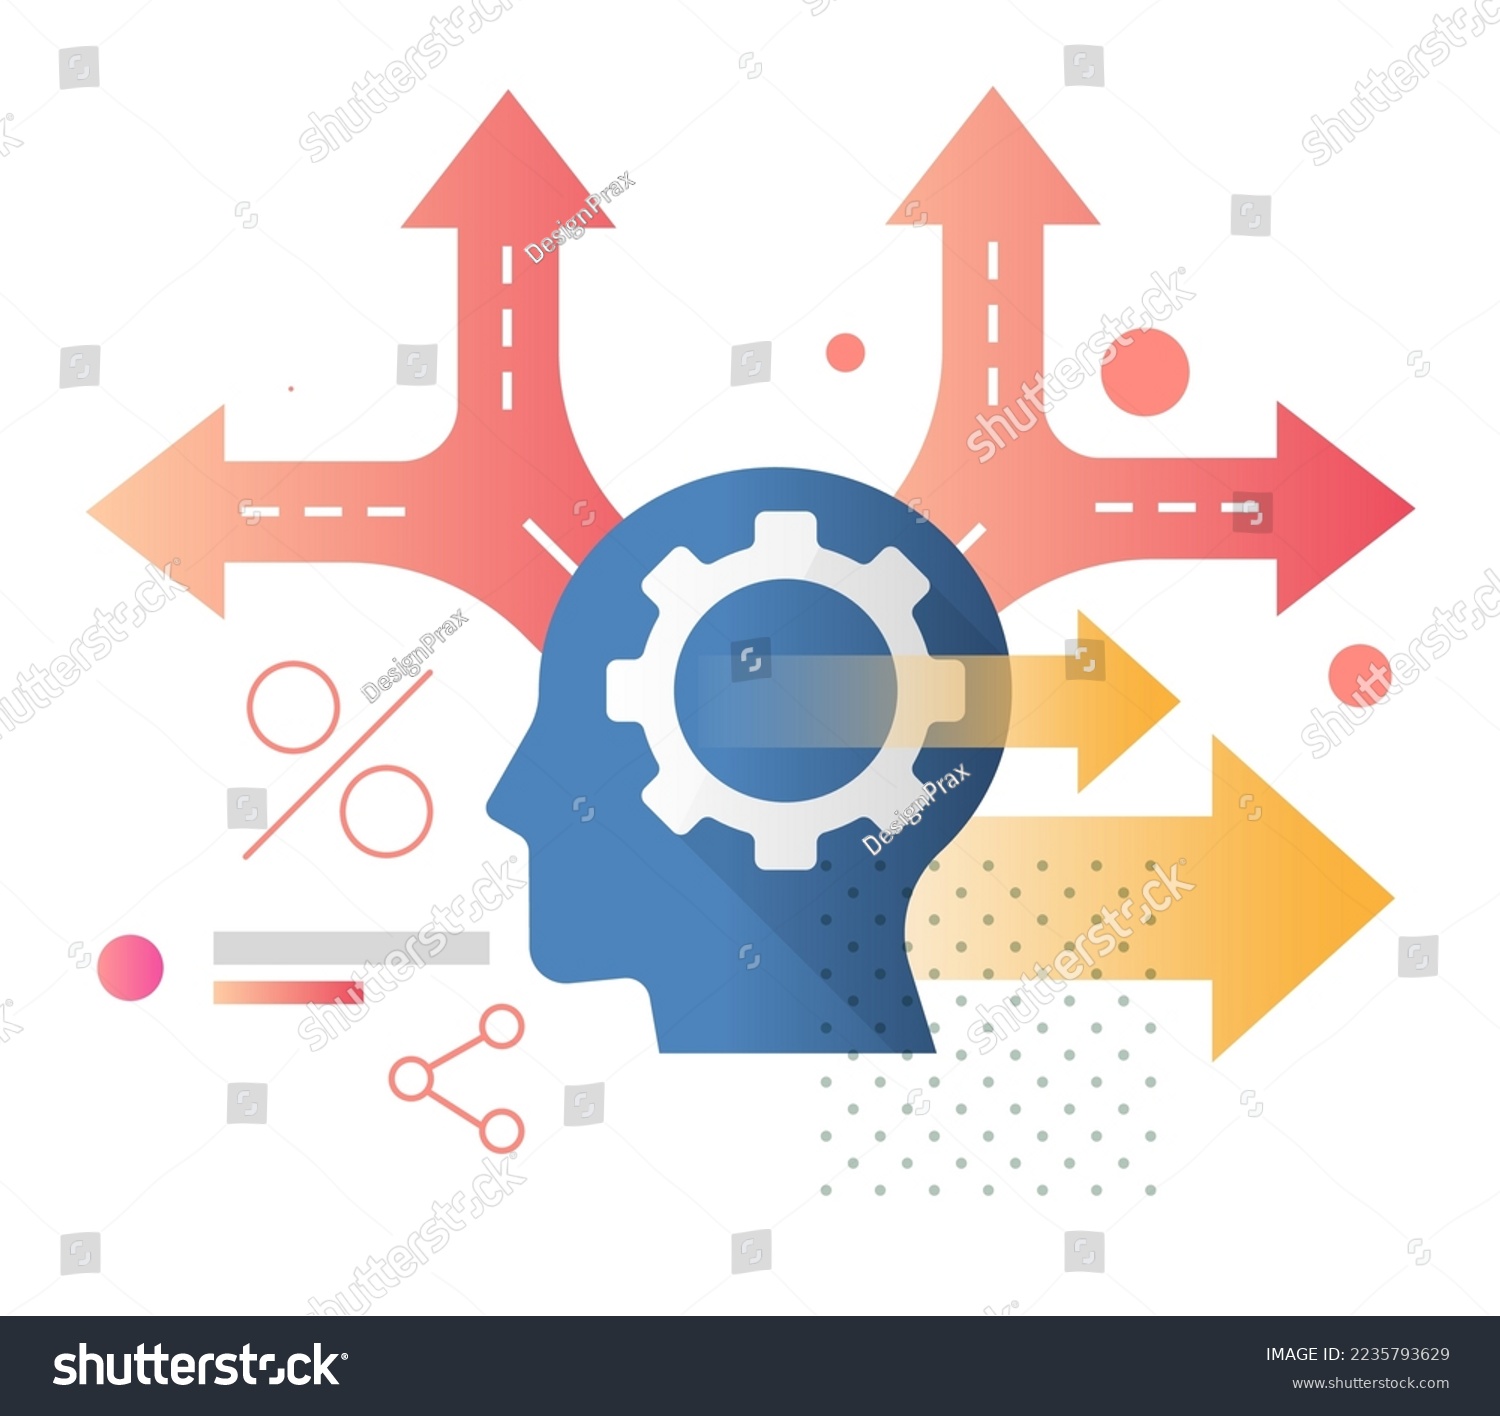 Business Decision Making Challenge - Abstract Illustration as EPS 10 File #2235793629